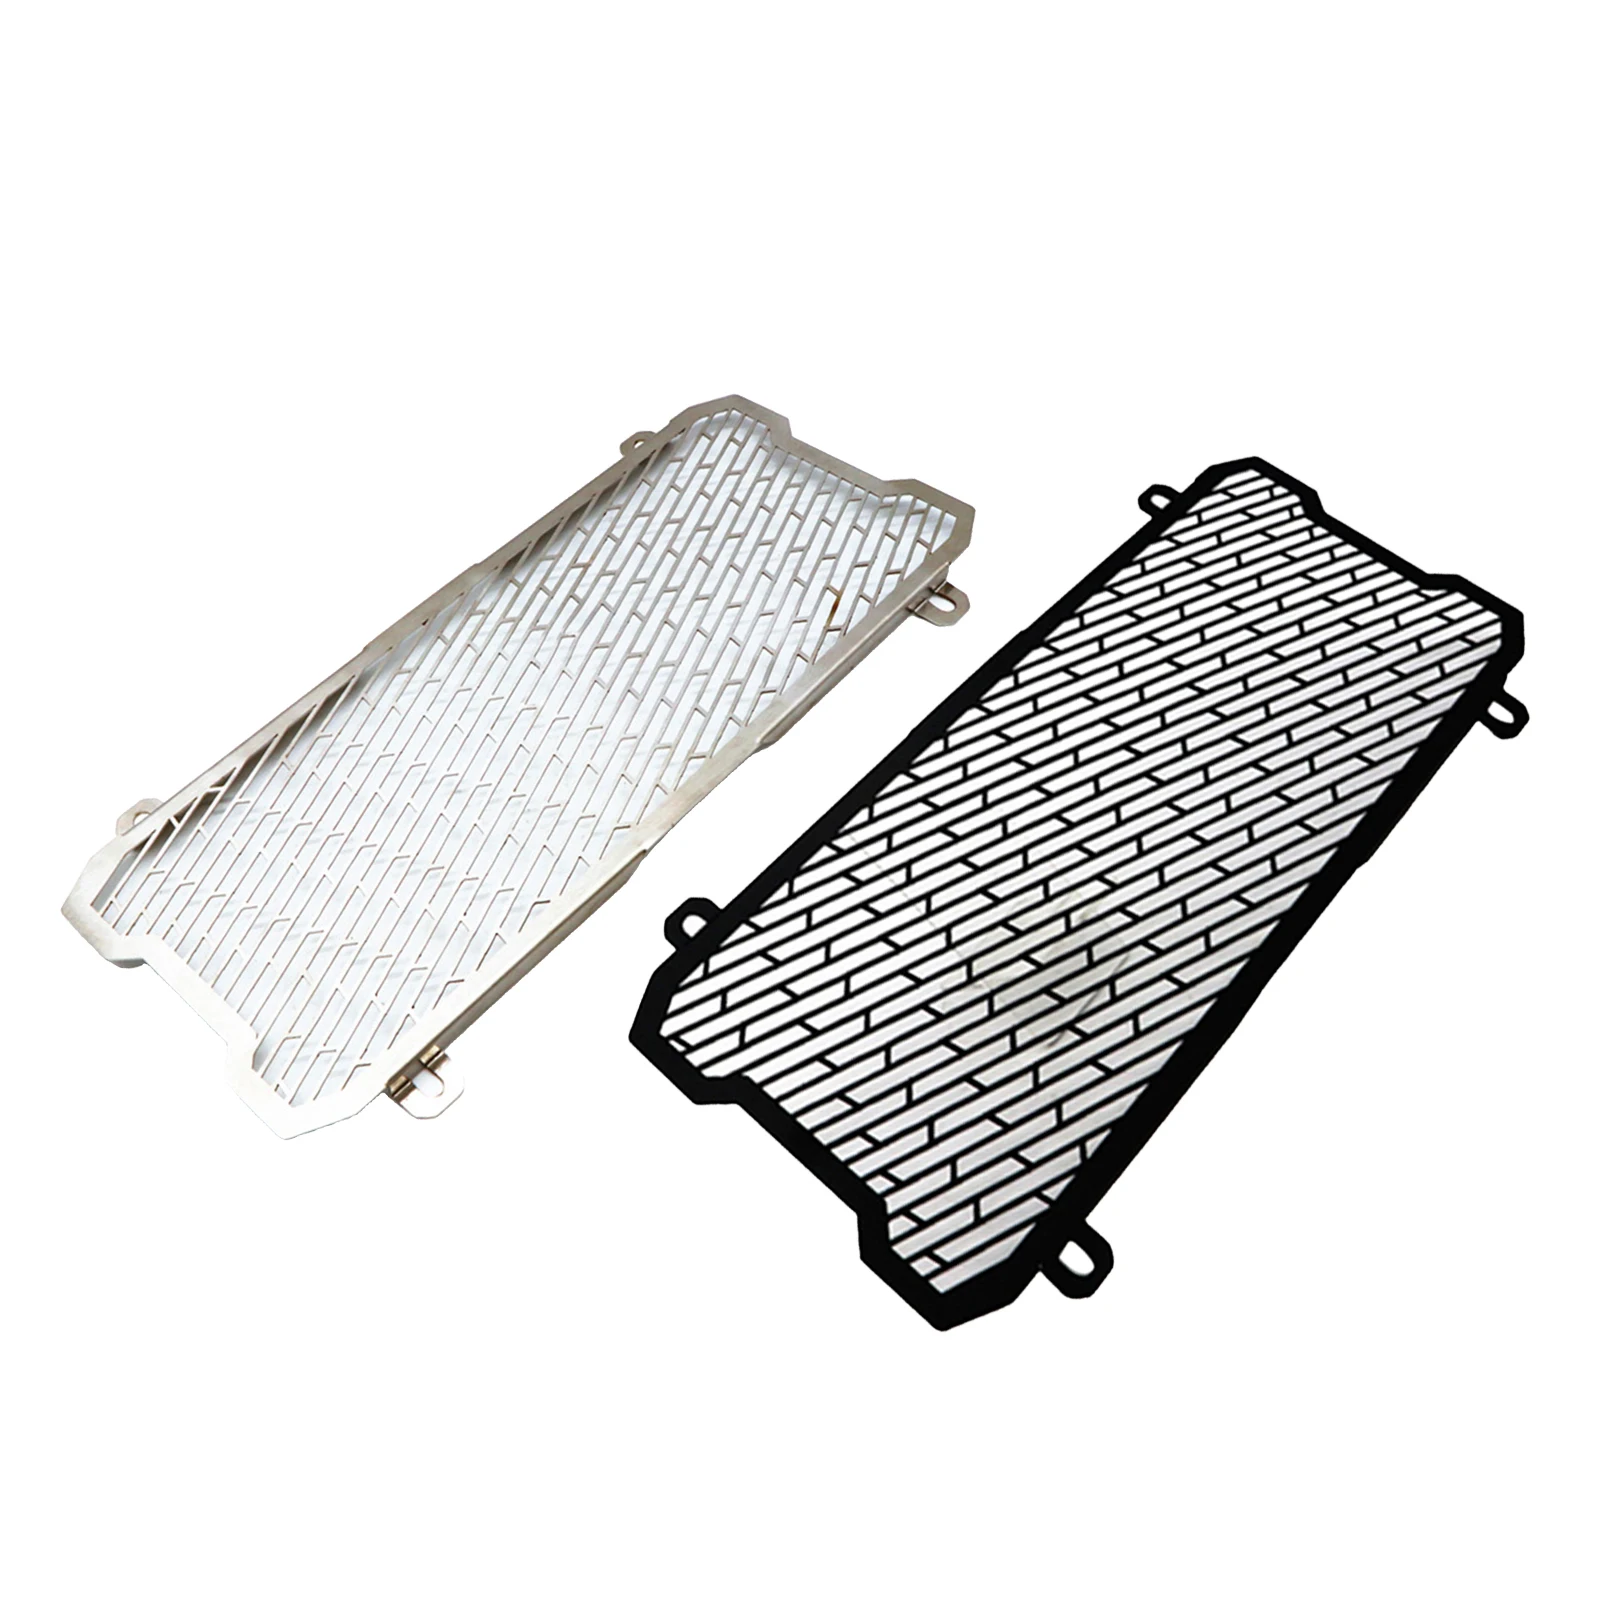 

Stainless Steel Motorcycle Radiator Grille Grill Shrouds Guard Protector Bezel for Kawasaki Z650 Z 650 2017 2018 2019 .